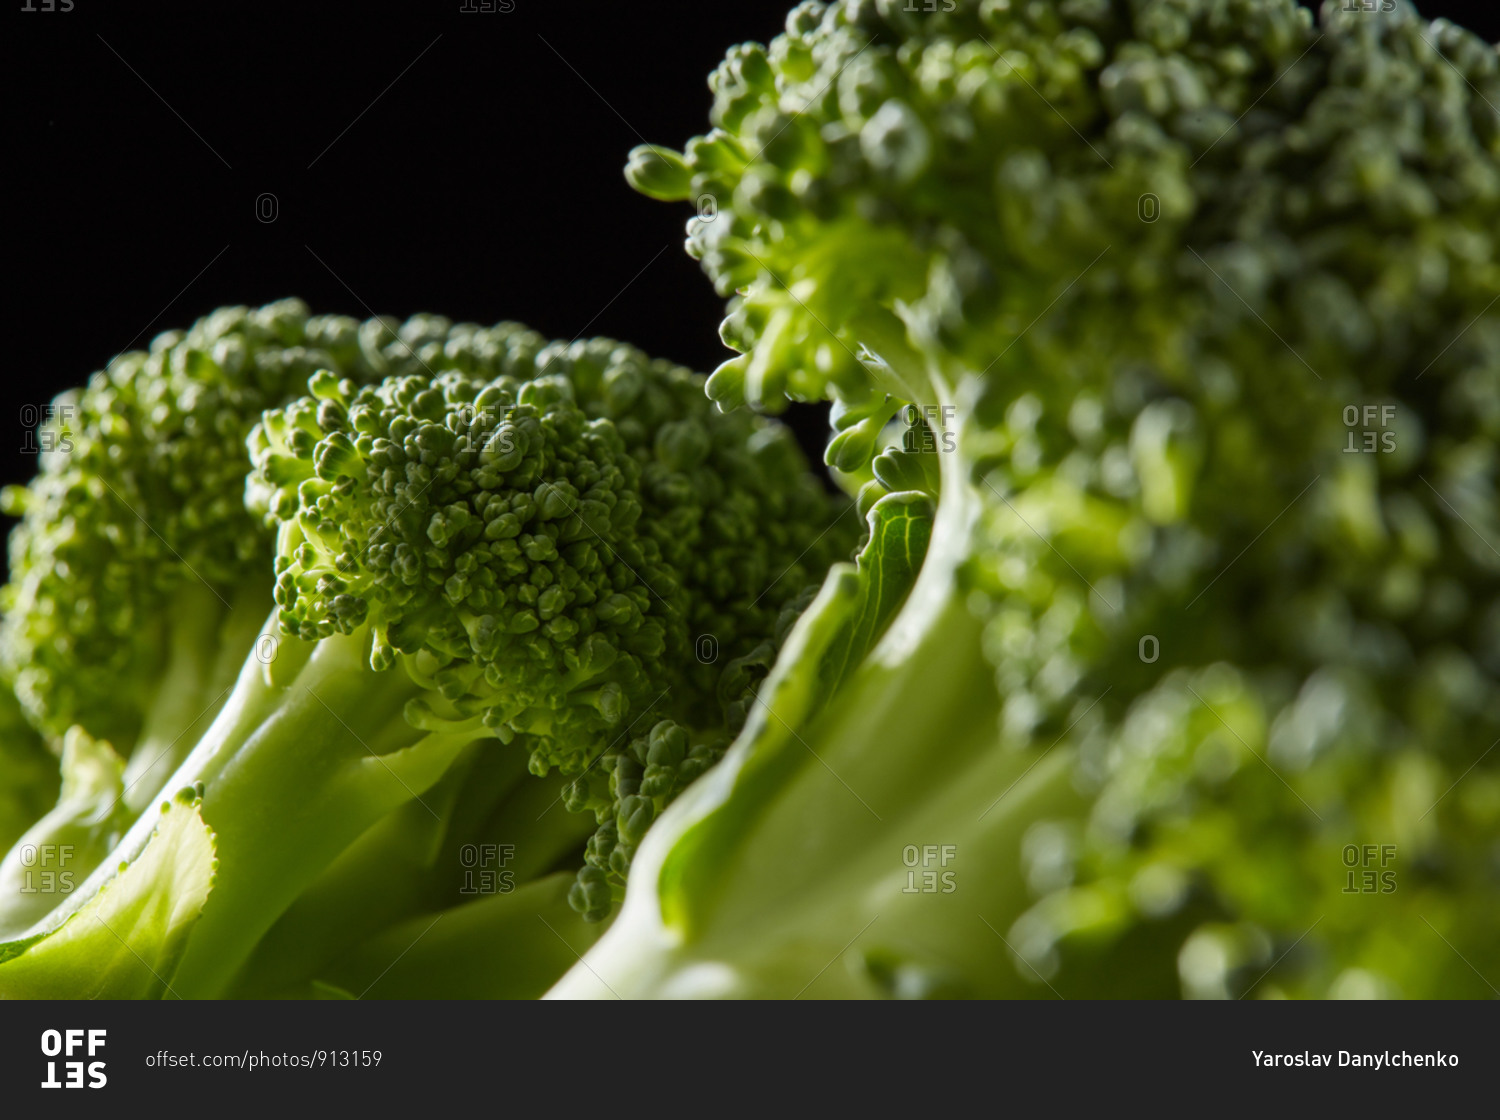 Home grown natural broccoli sprouts, healthy raw plant for cooking vegetarian food on a black background, copy space. Close-up view. Dieting healthy food.